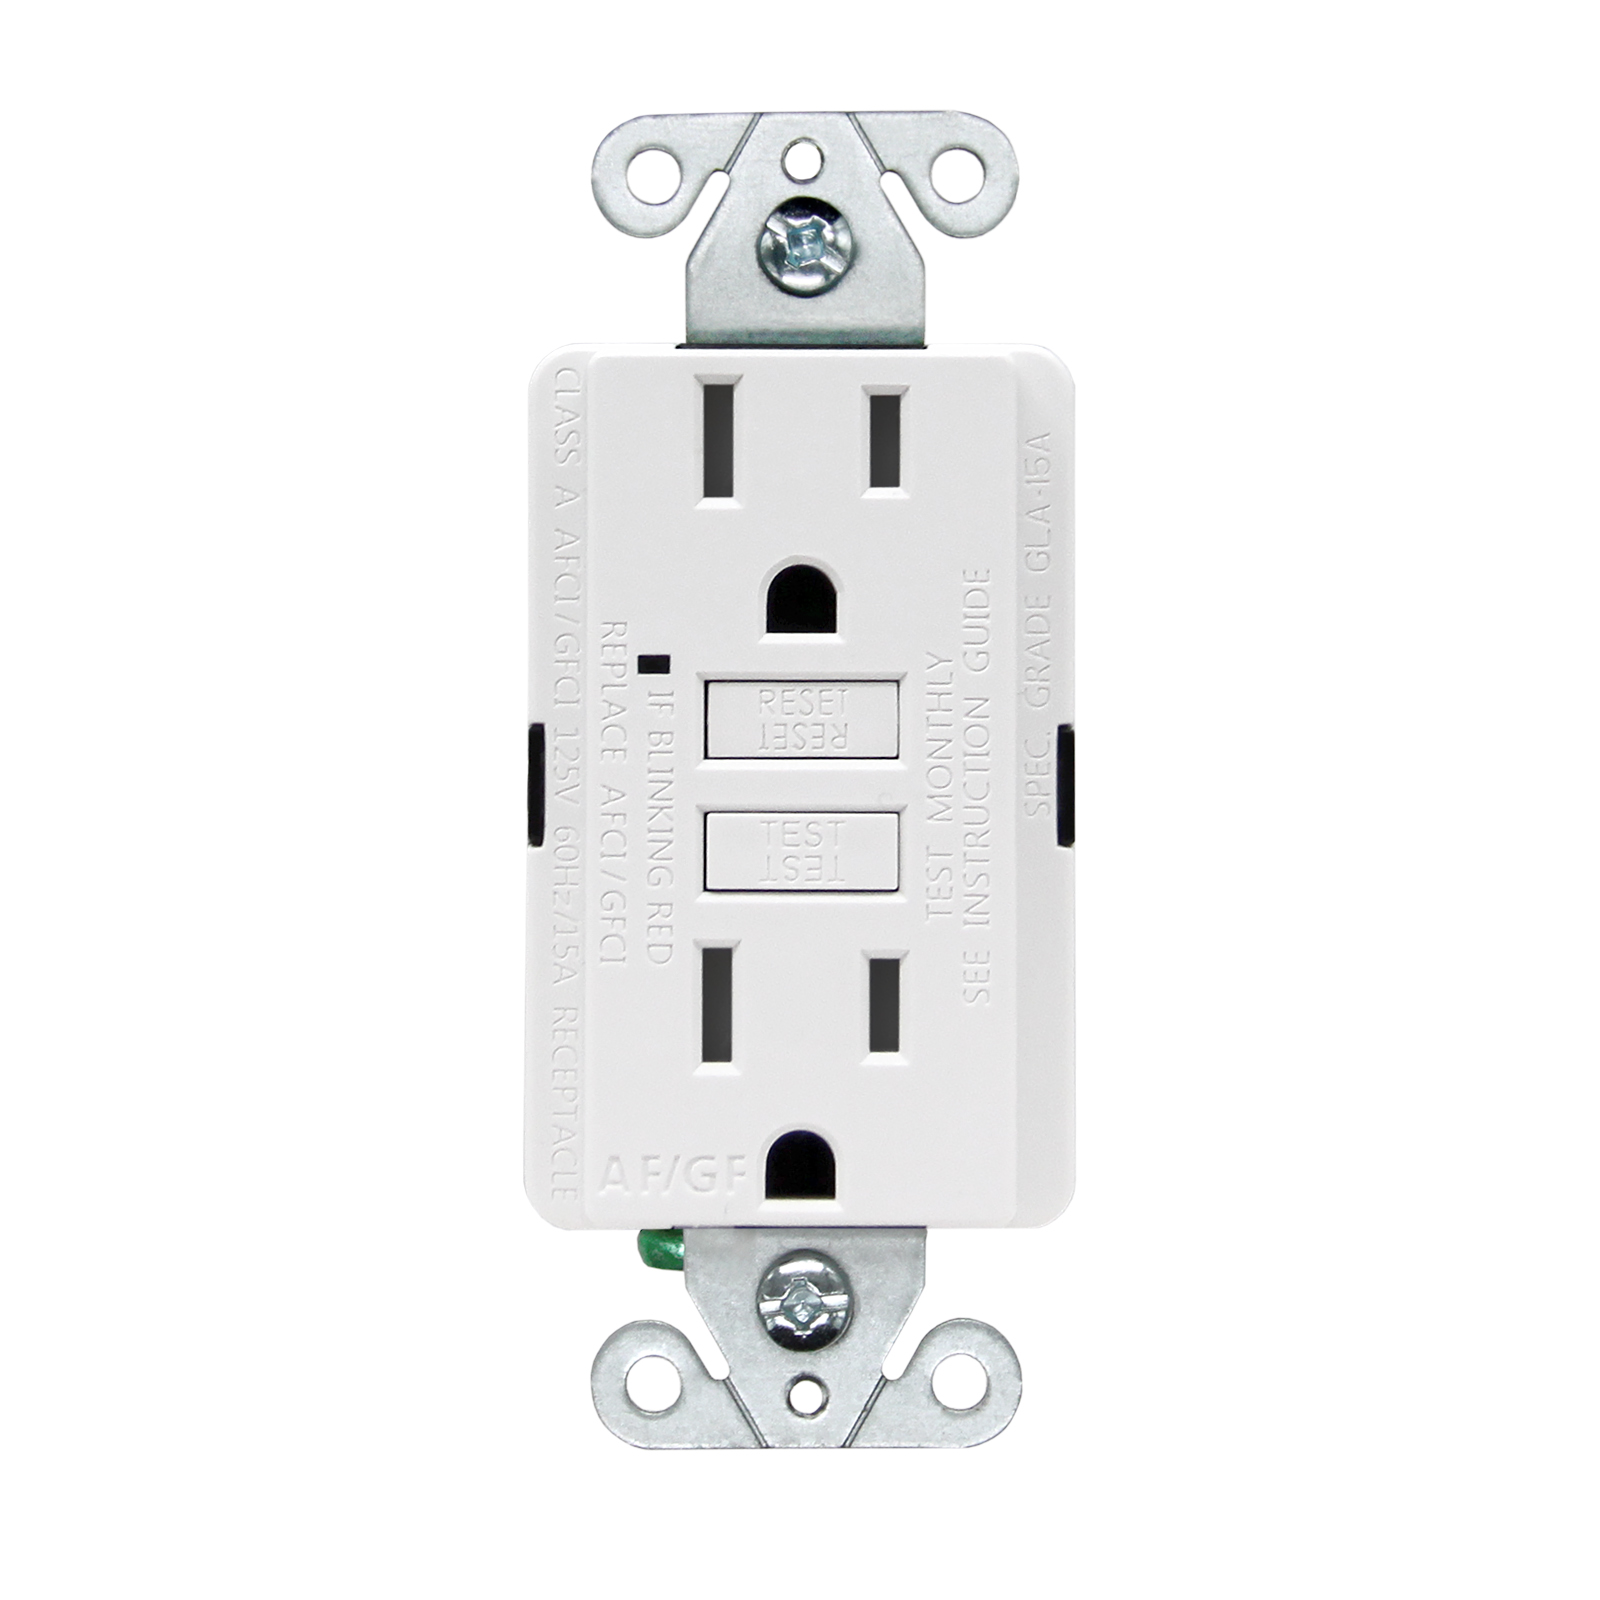 UL Listed New Arrival Self-Test 15 Amp/125V Dual Function AFCI/GFCI Receptacle